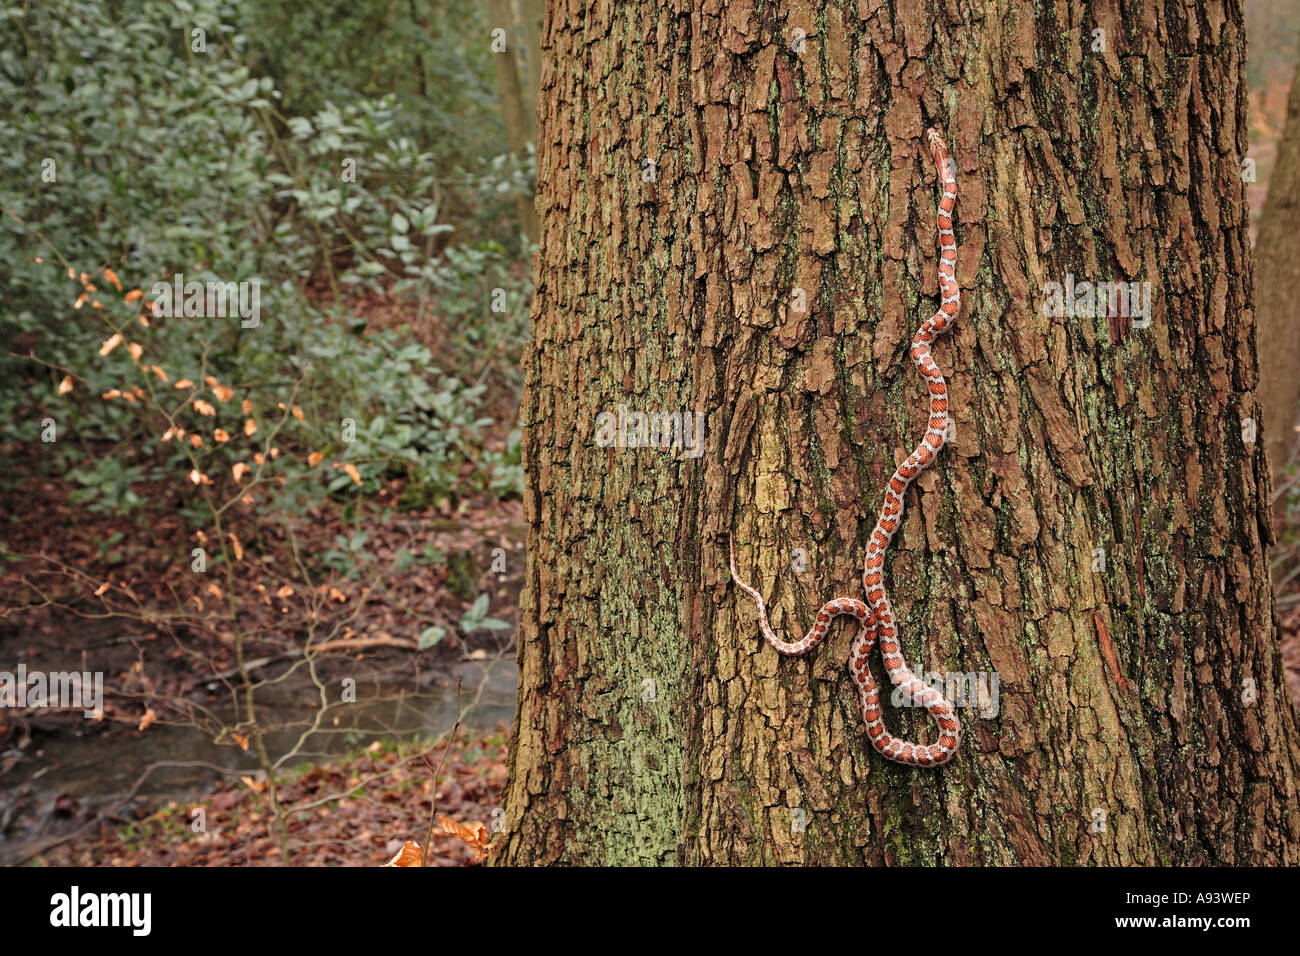 Leopard snake Zamenis situla climbing tree trunk in a temperature forest Stock Photo